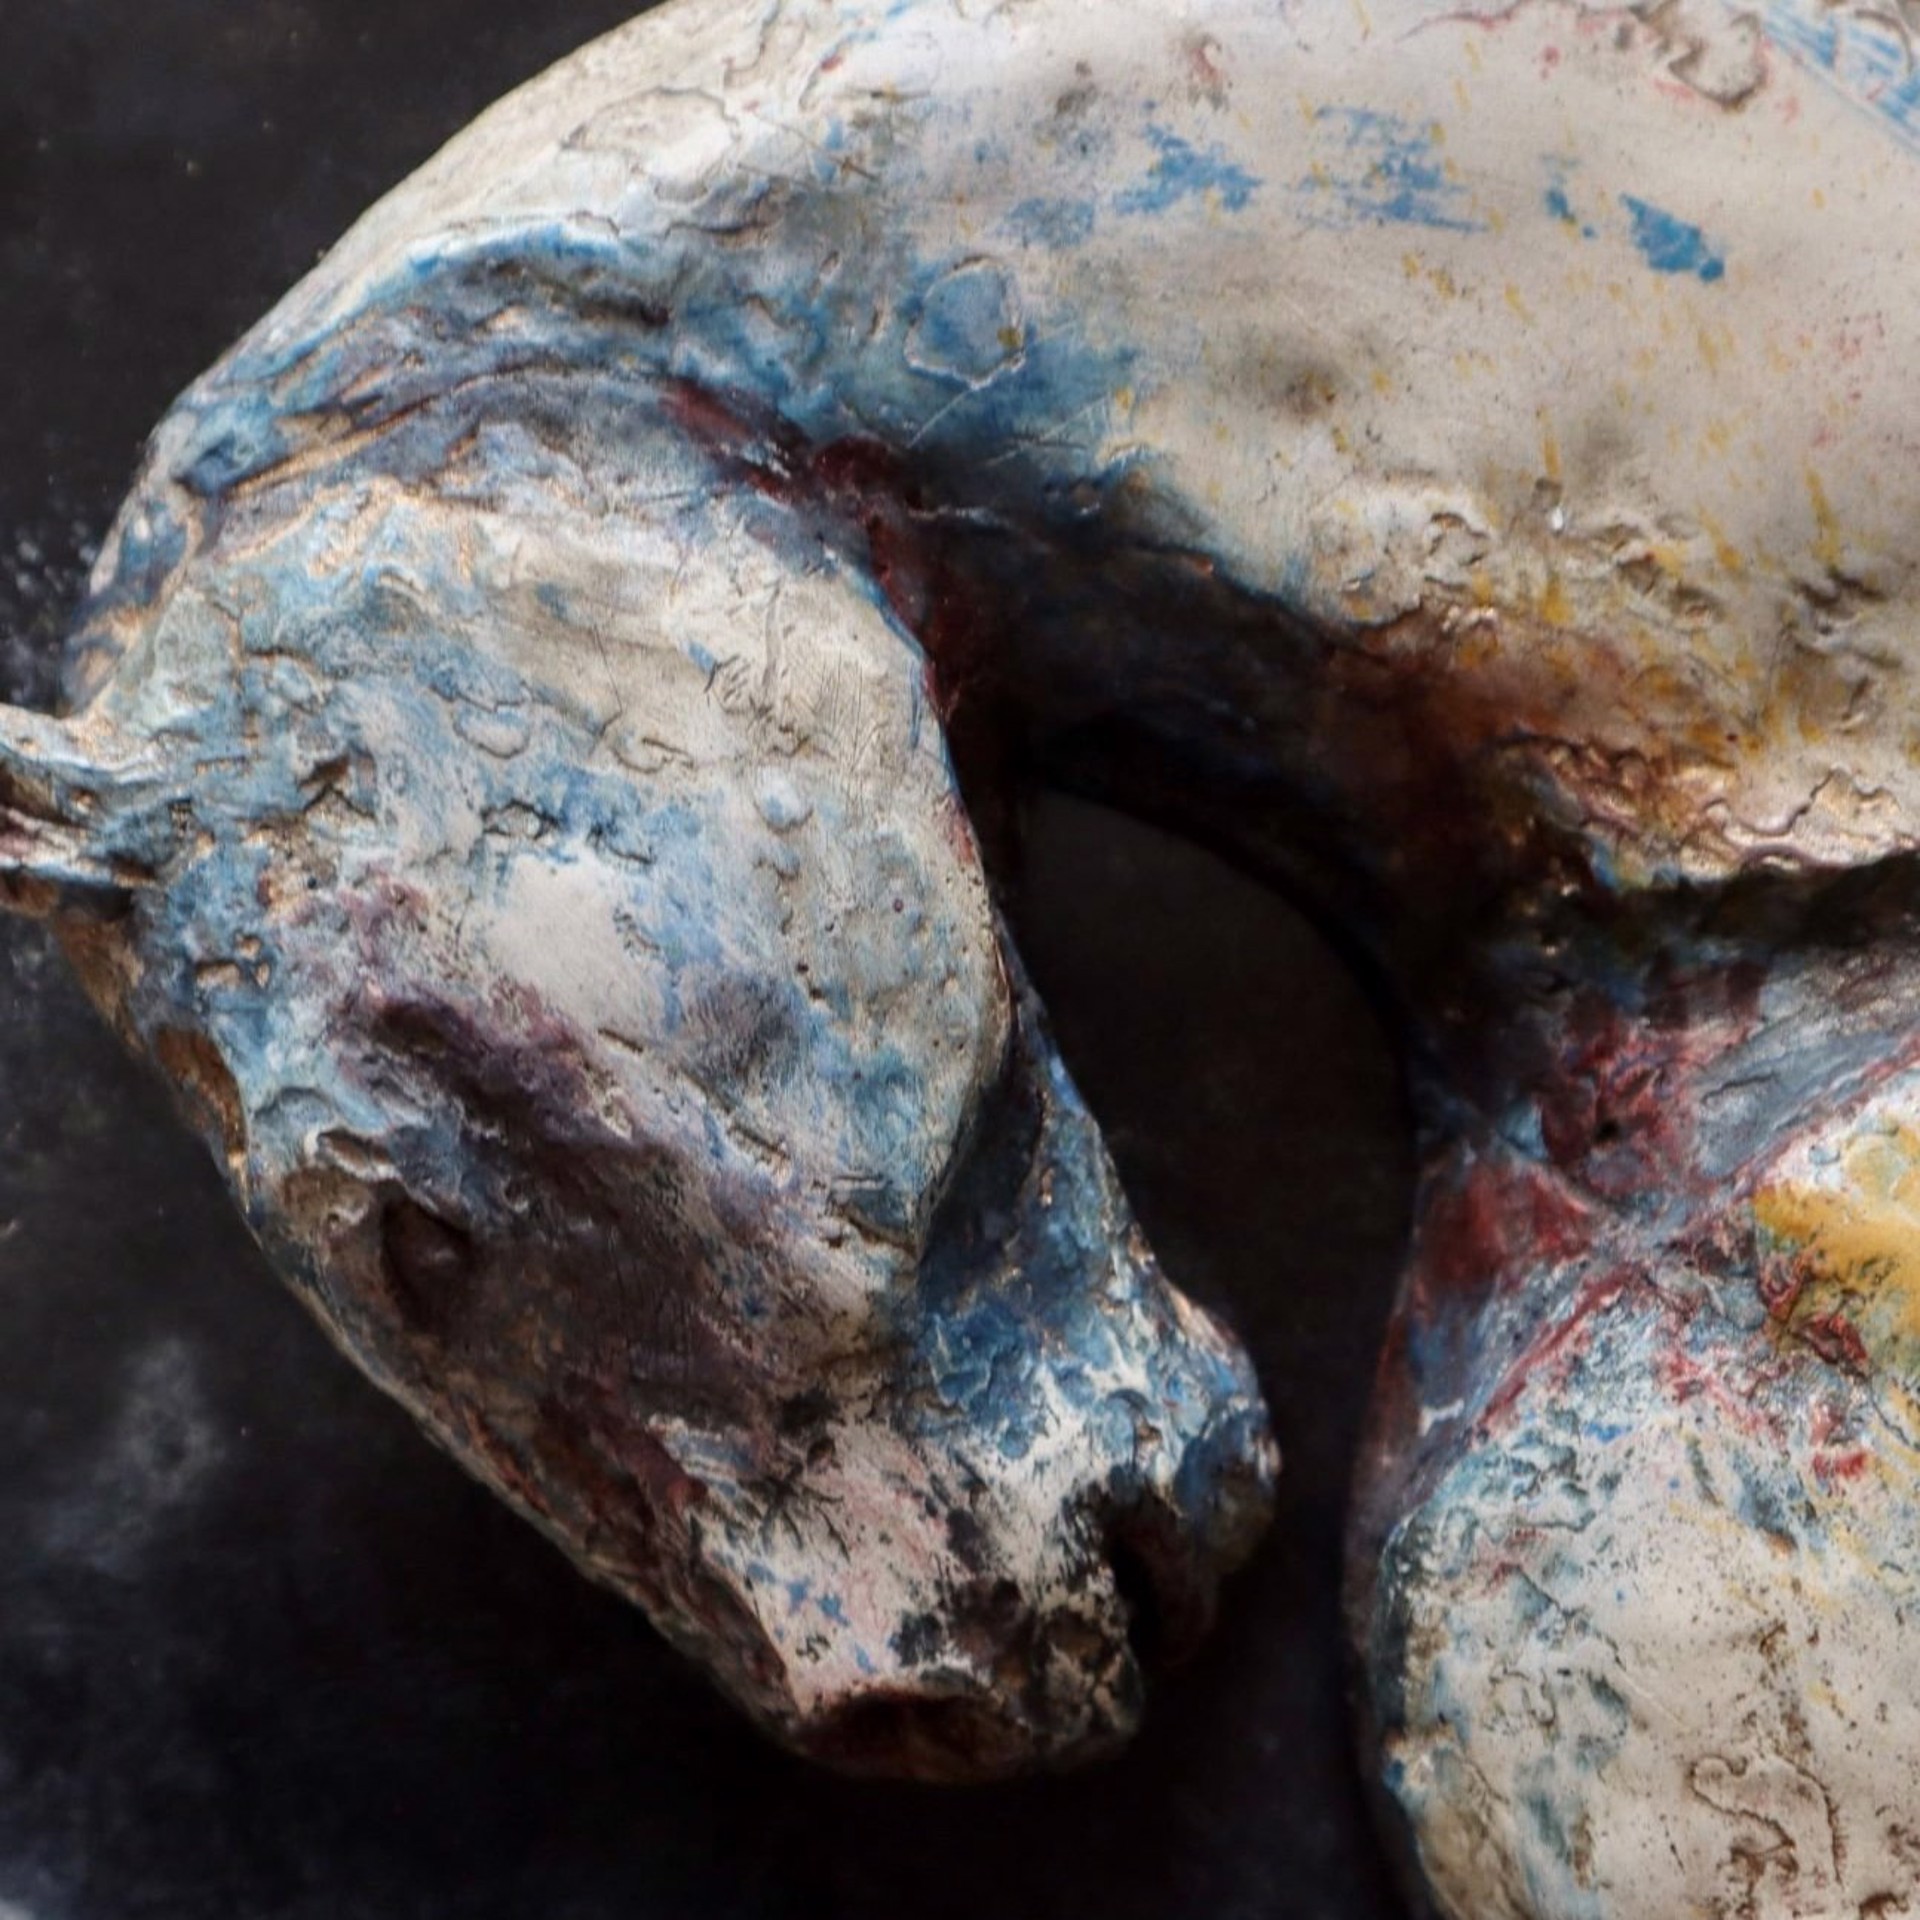 Carousel Horse - Painted Plaster by Ollie Holman